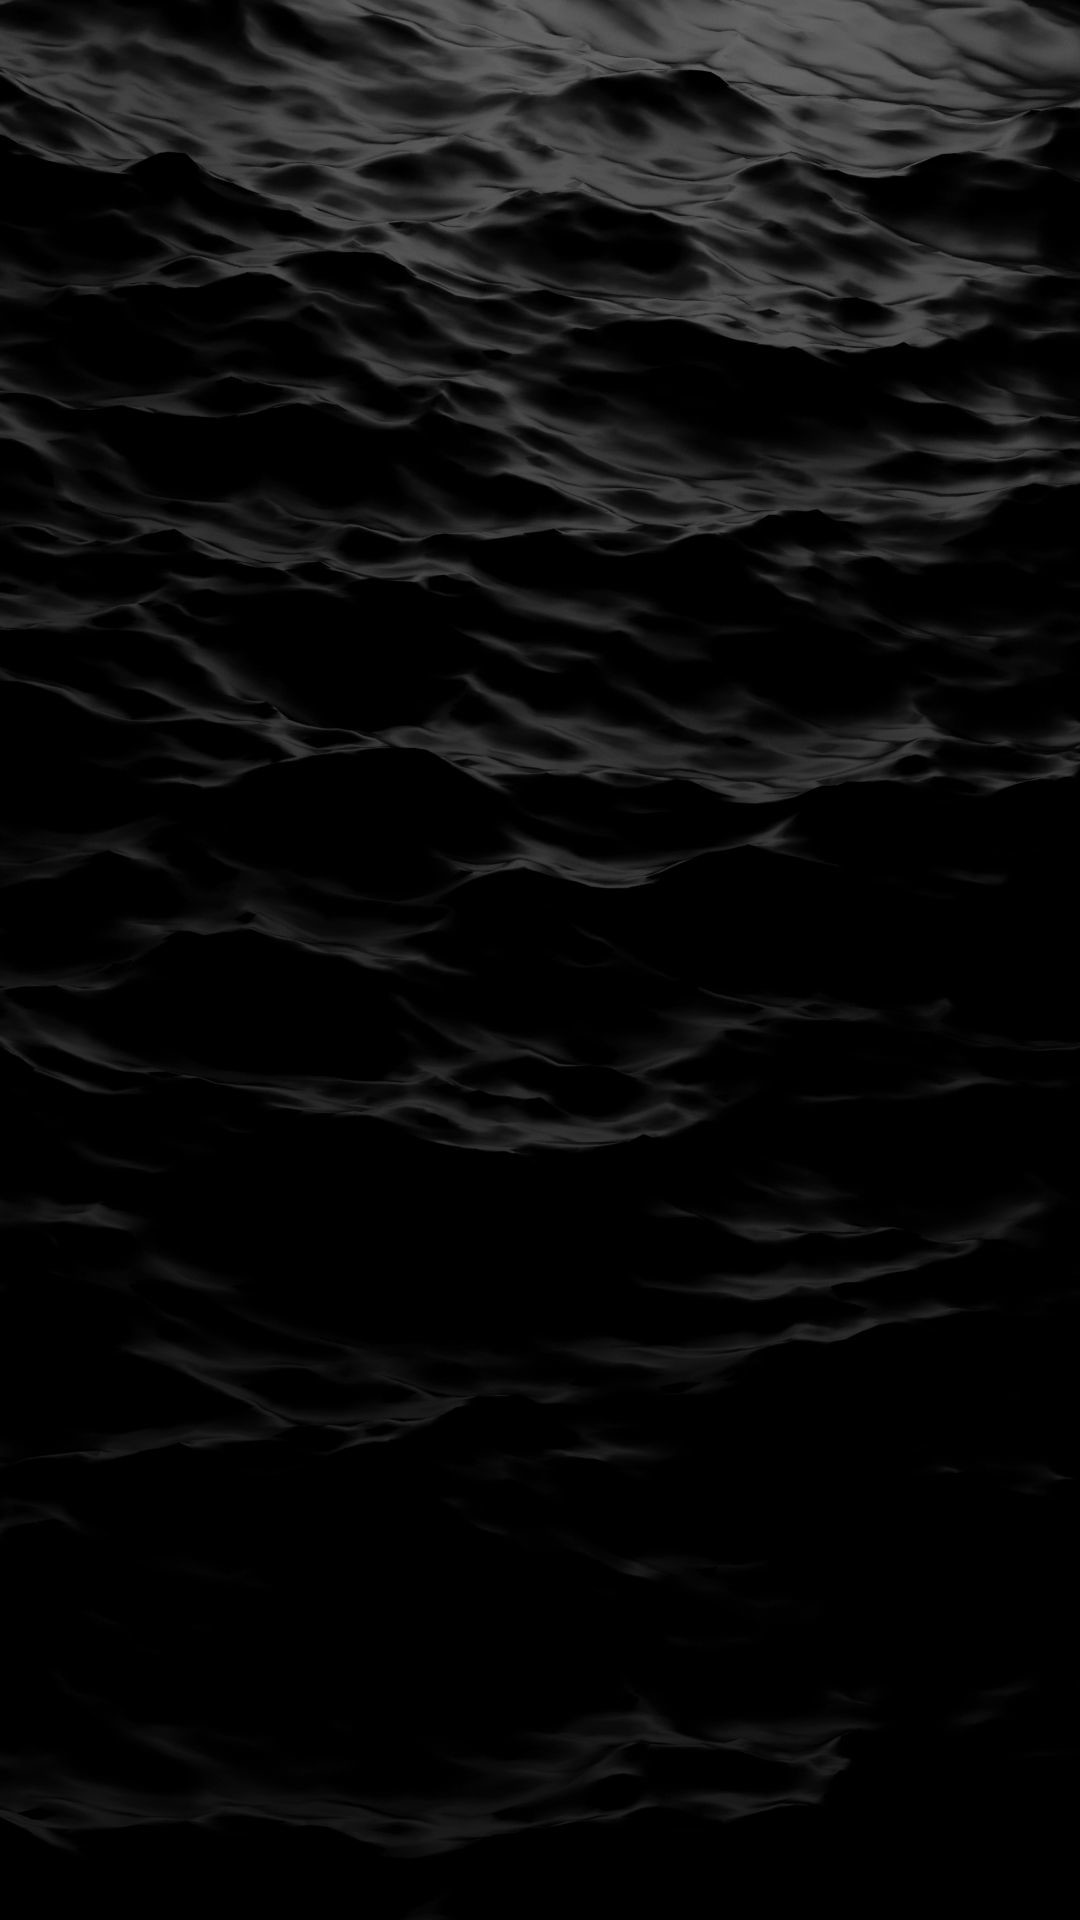 hd wallpapers for iphone 7,black,water,darkness,sky,atmosphere